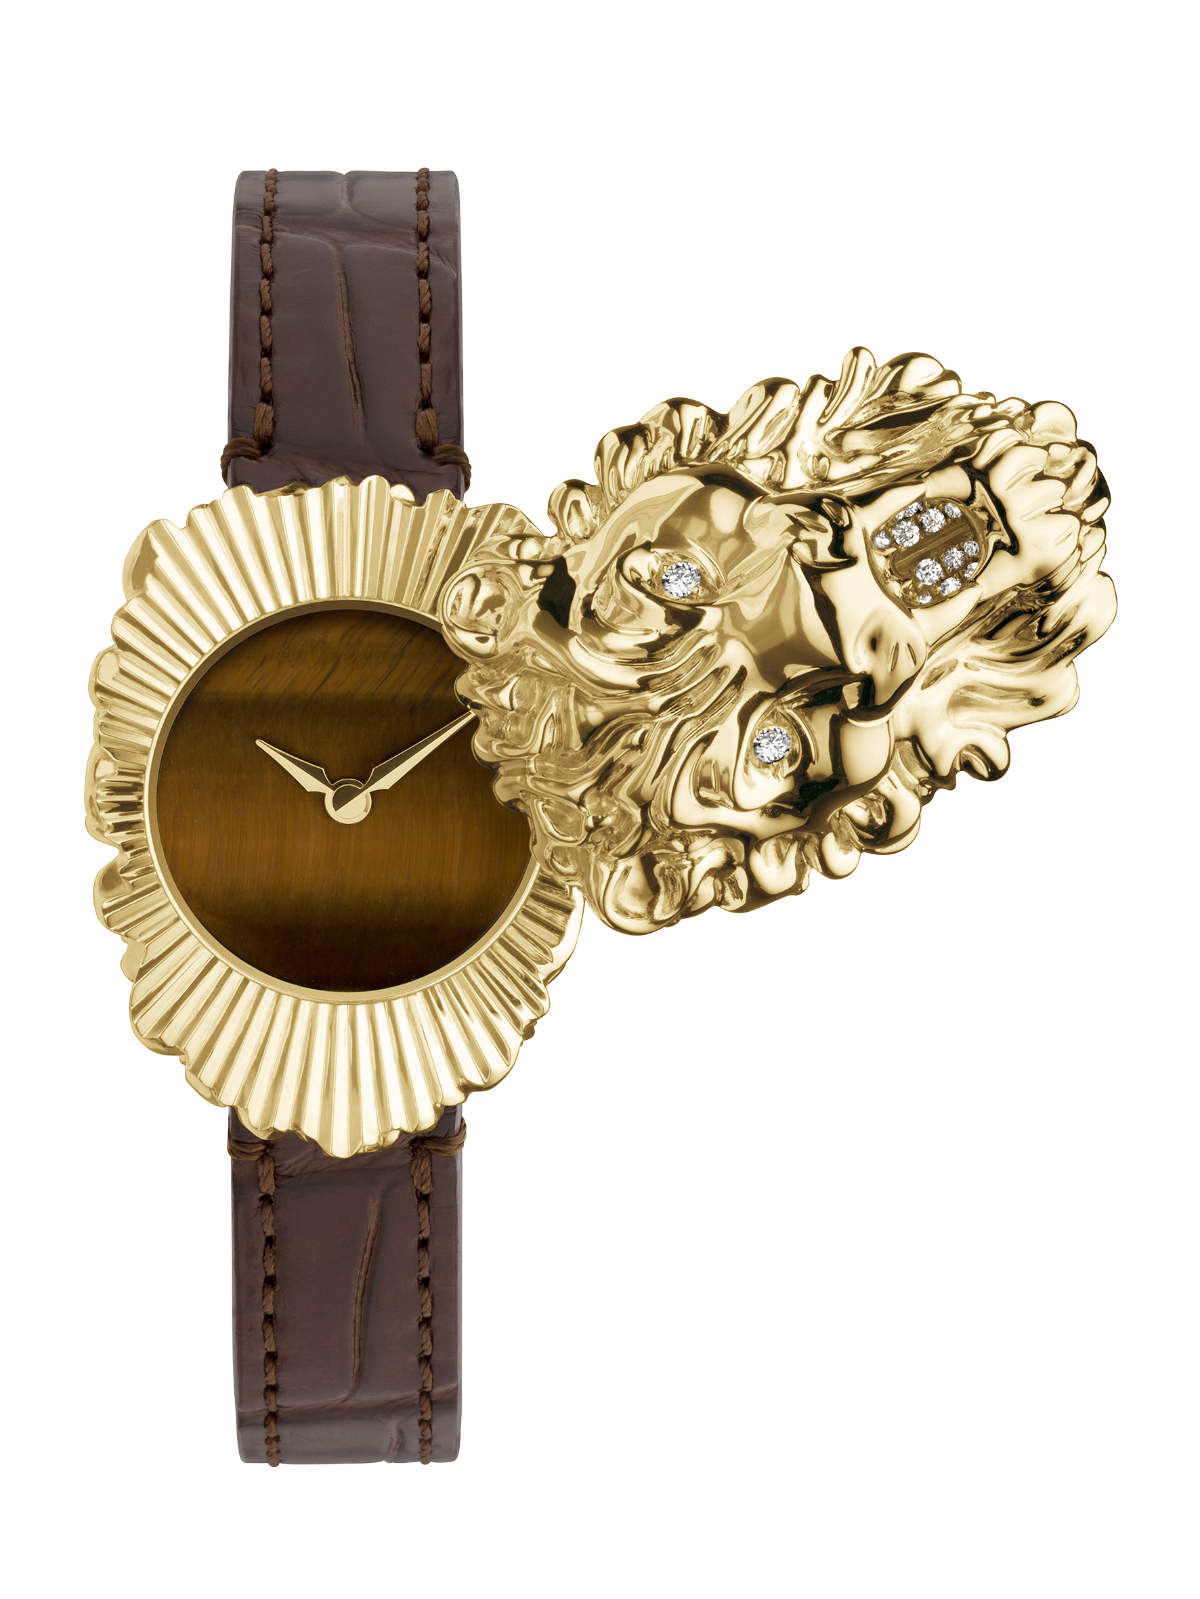 Gucci Presented The Lion Head, Dionysus And Gucci Play, An Array Of High Jewelry Watch Designs